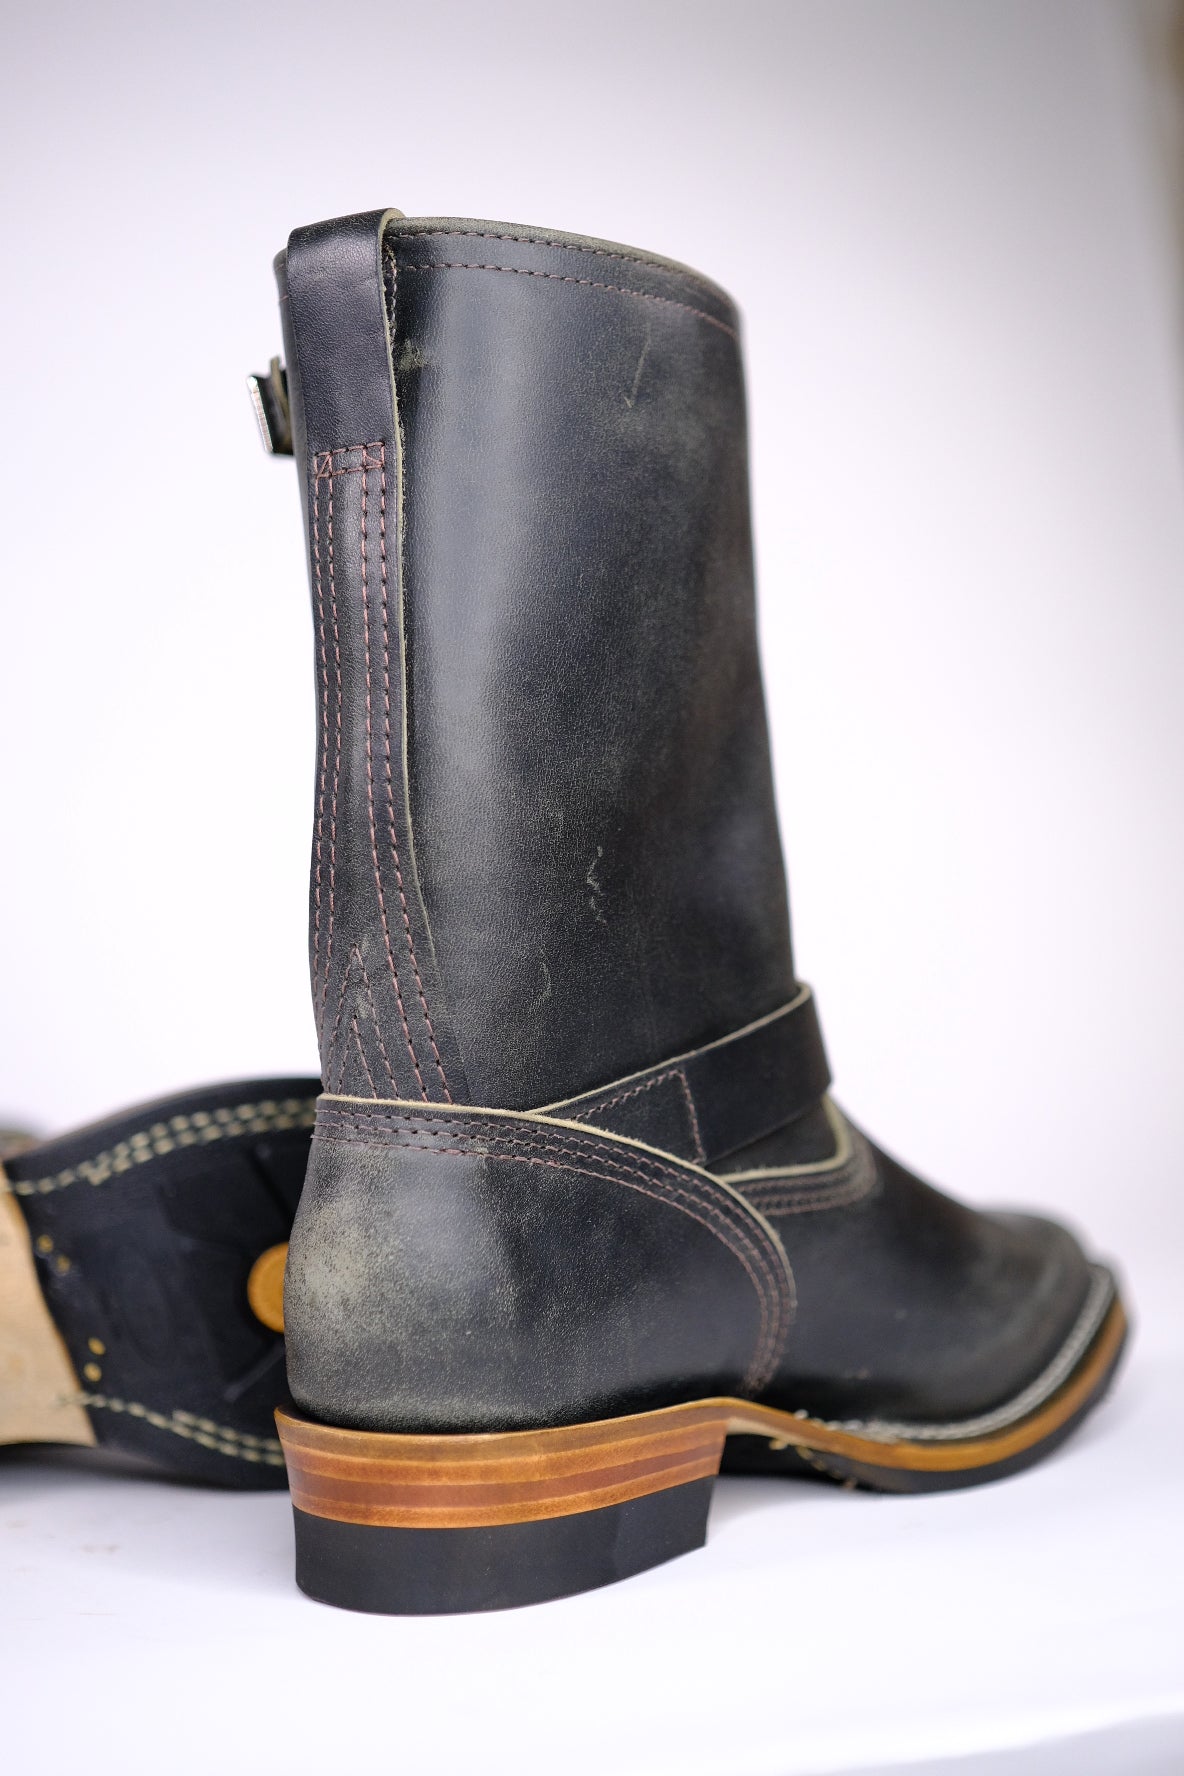 Wesco Boots X The Shop Mister Lou Petrolio Olive waxed Black Horsehide Engineer Boot Pre Order